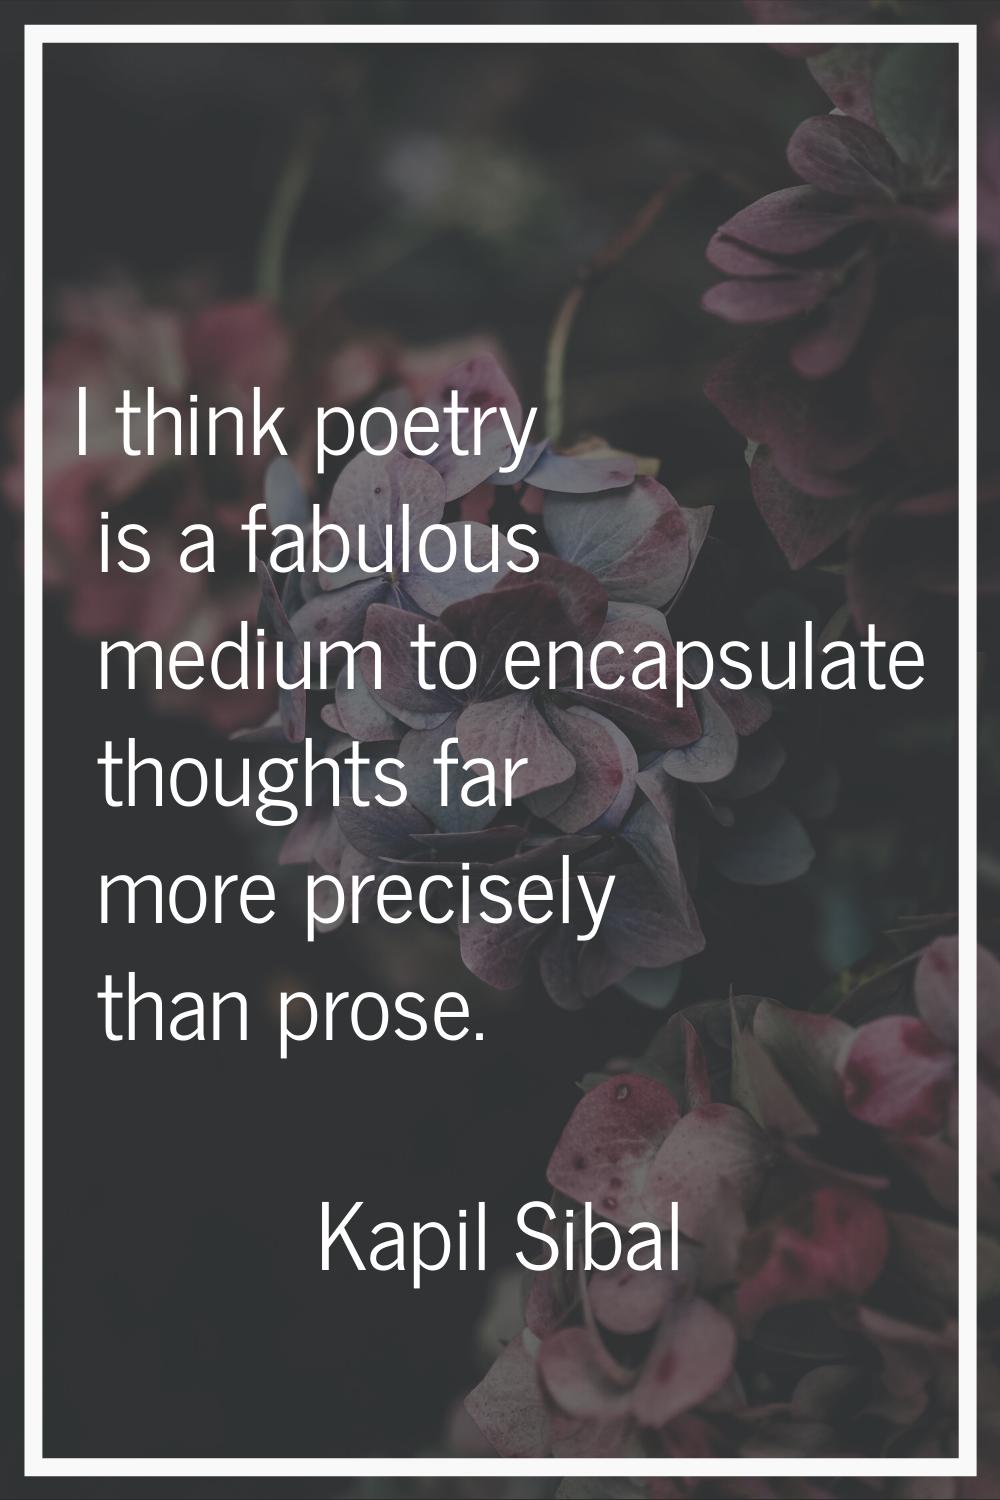 I think poetry is a fabulous medium to encapsulate thoughts far more precisely than prose.